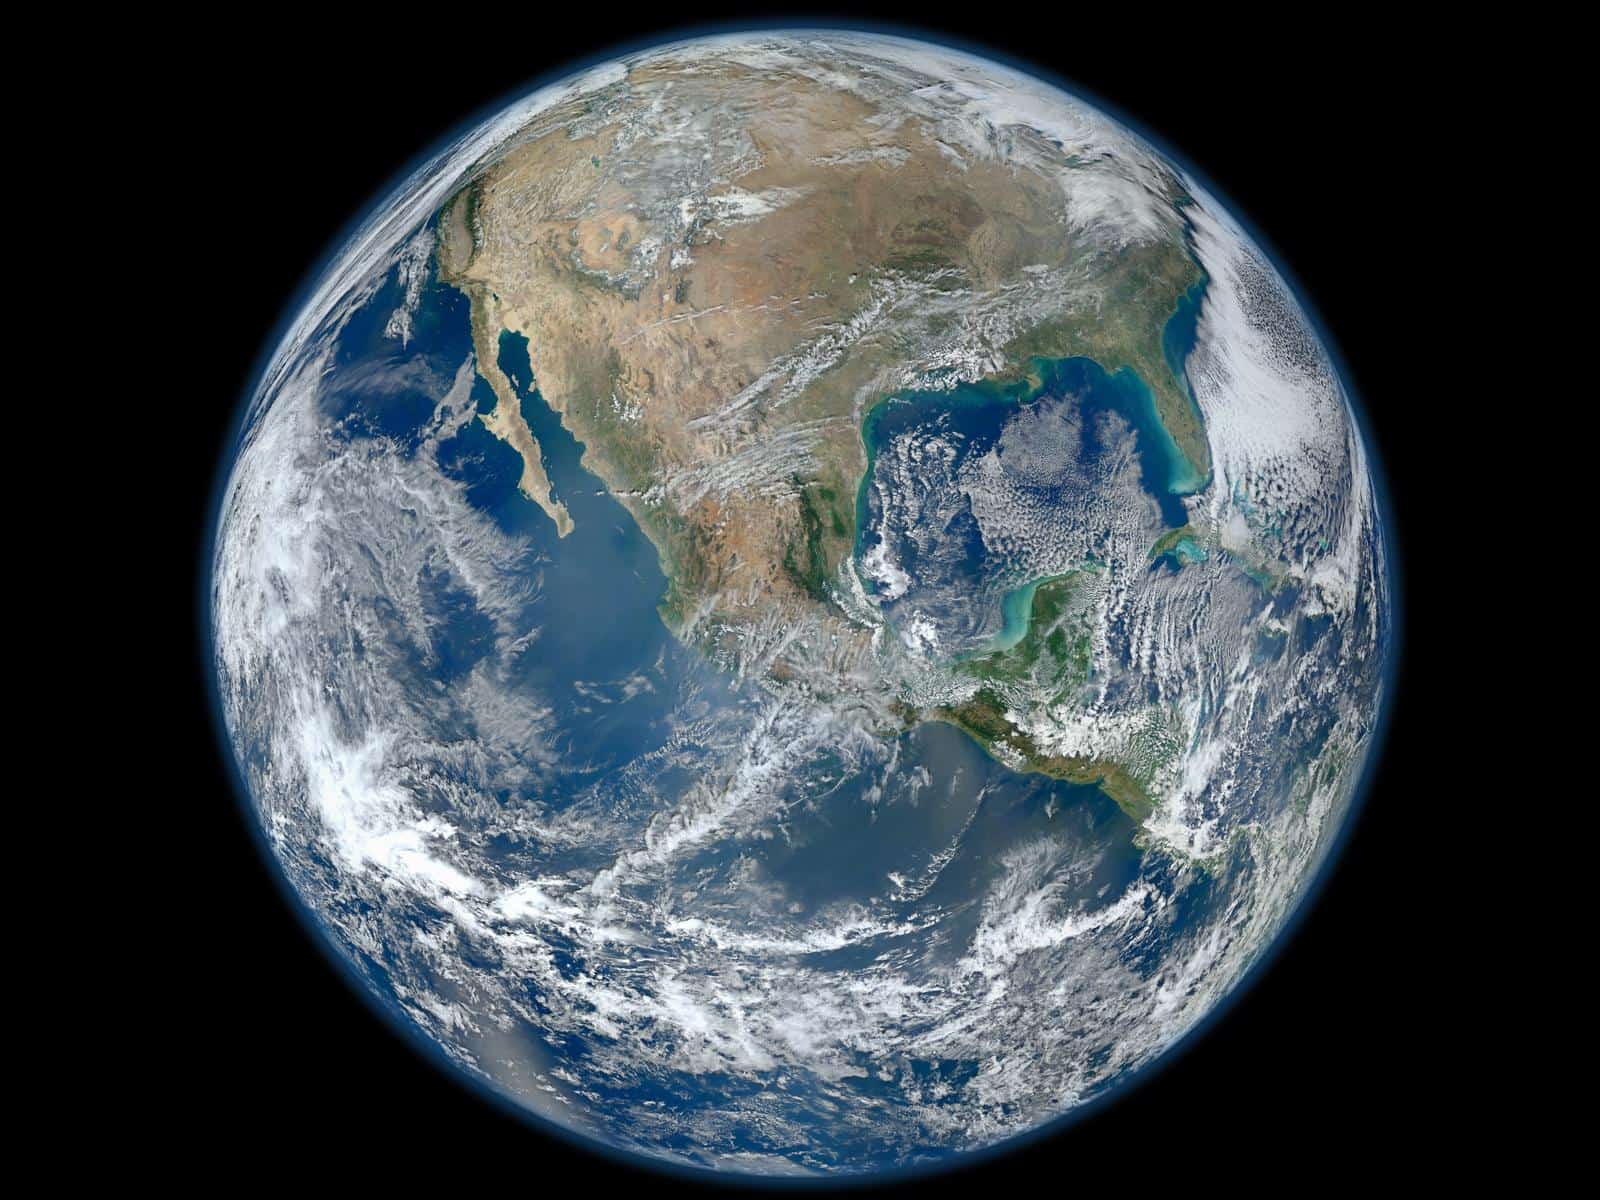 Photo of Earth taken from space.